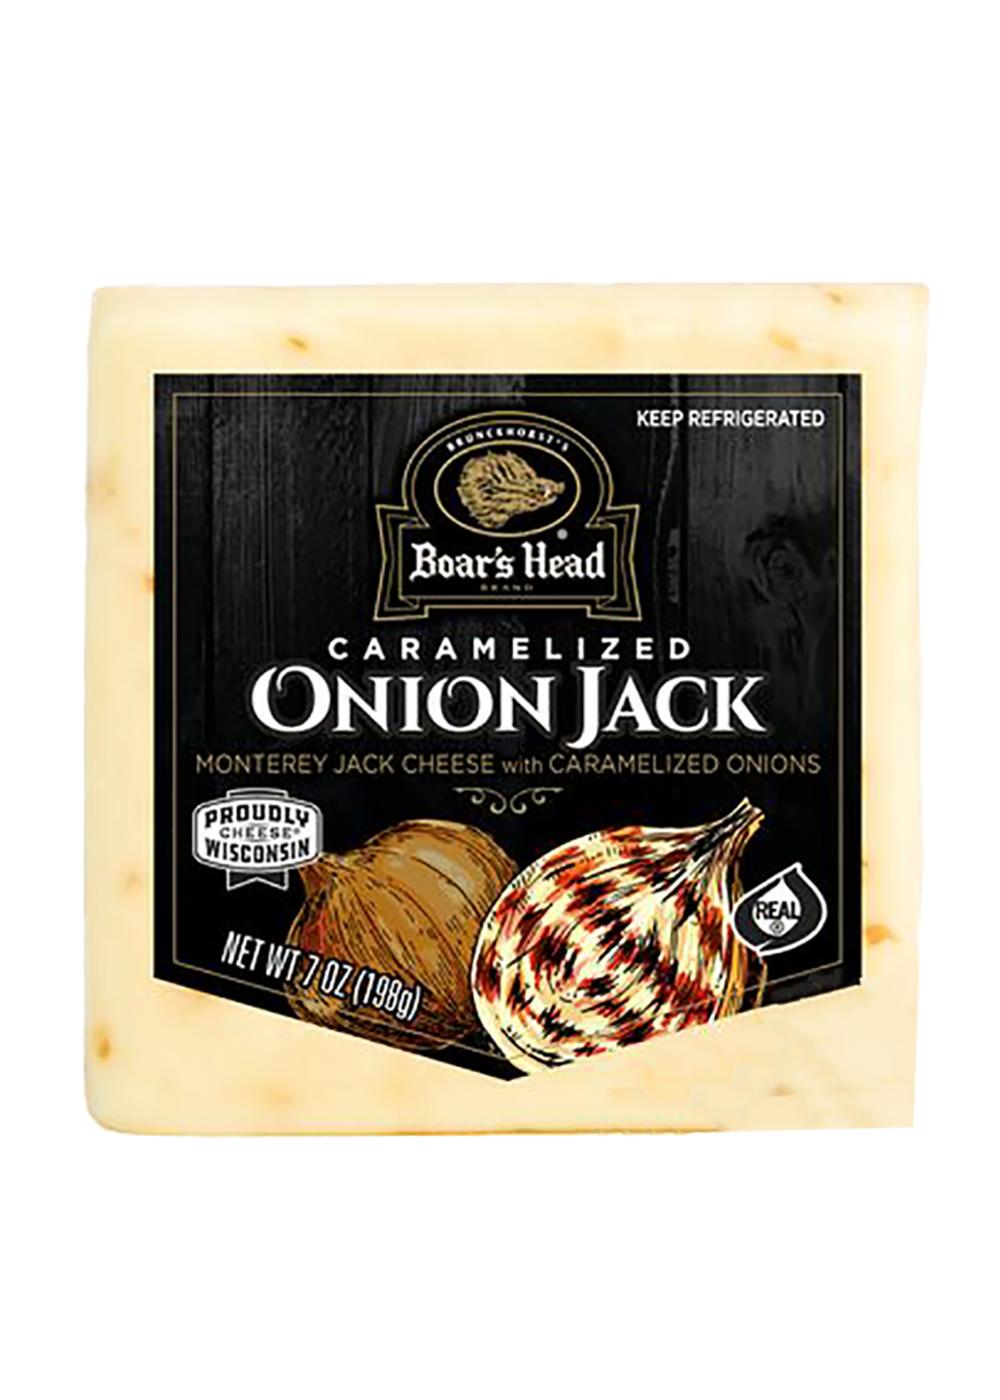 Boar's Head Caramelized Onion Jack Cheese; image 1 of 2